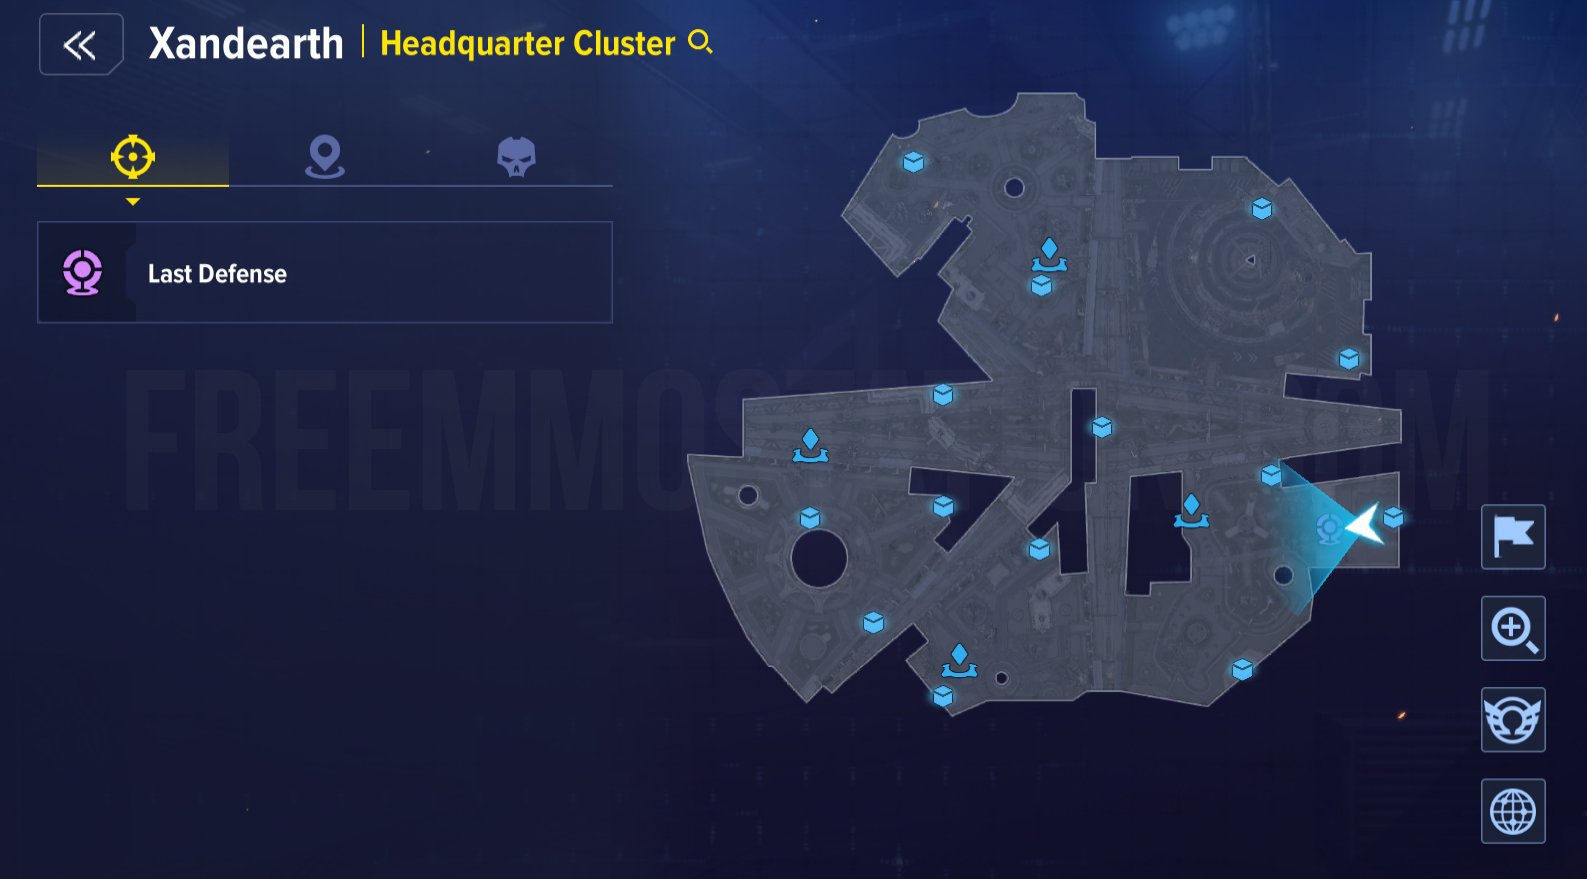 Xandearth Headquarter Cluster 14 Collectibles total